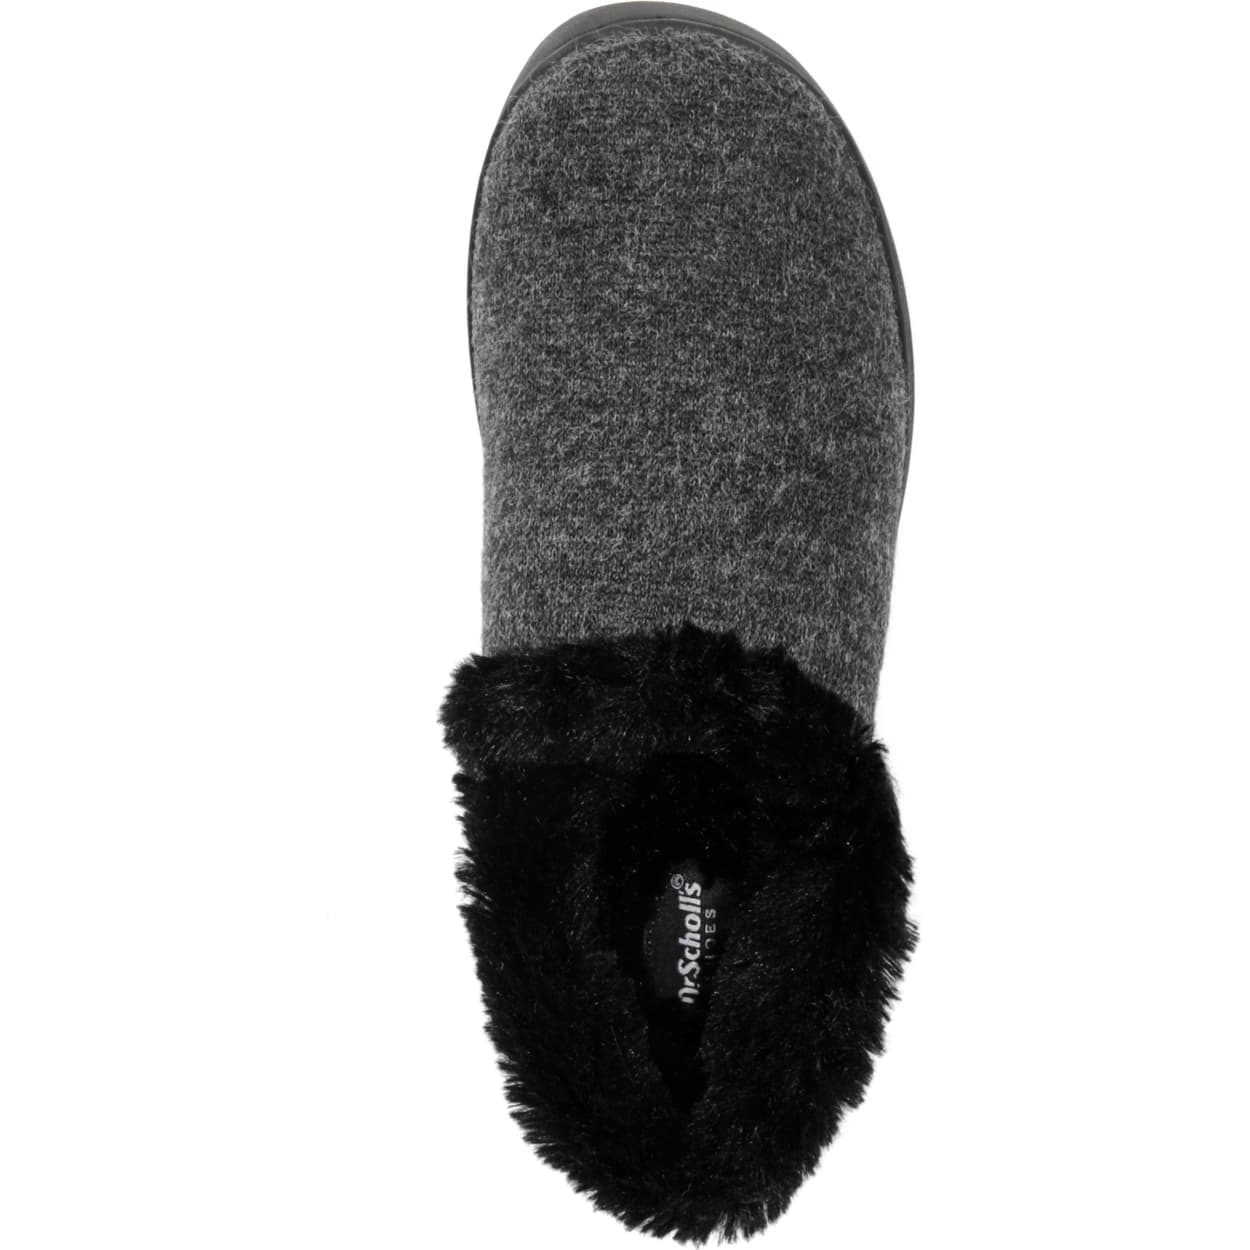 Dr. Scholl's Womens Cozy Madison Slippers